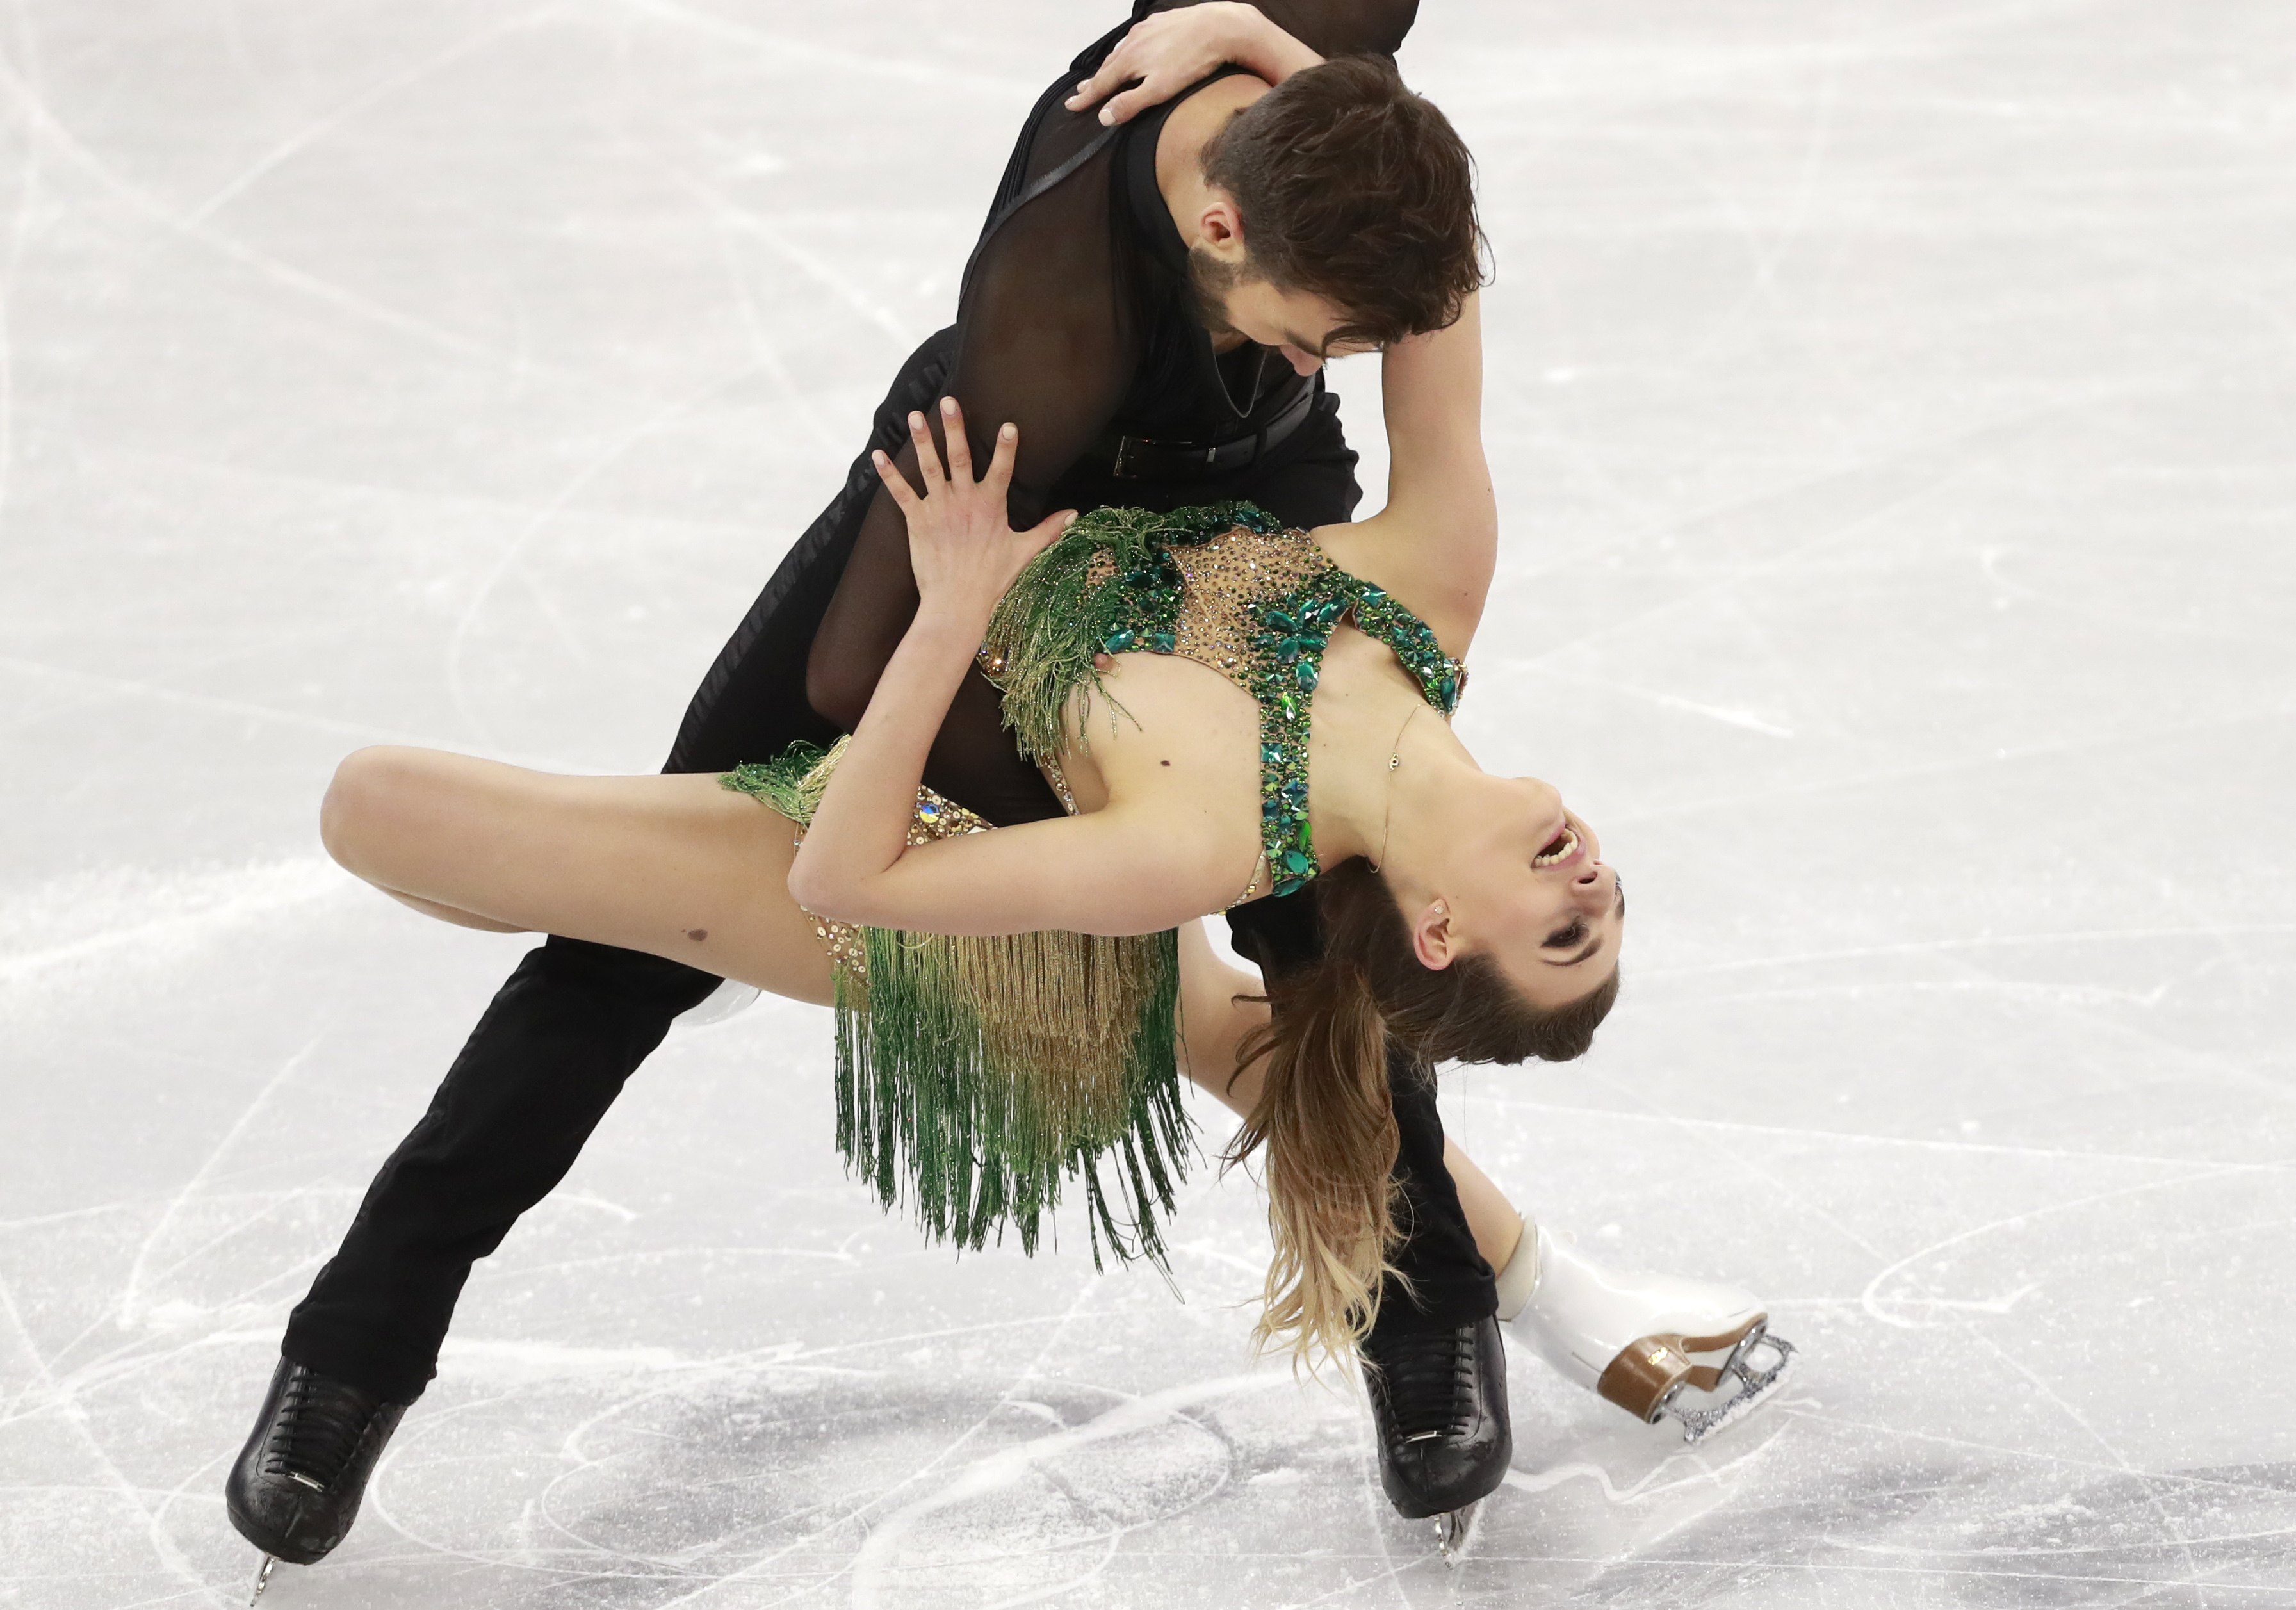 2018-02-18 08:53:13 epa06541804 Gabriella Papadakis and Guillaume Cizeron of France compete in the Ice Dance Short Dance of the Figure Skating competition at the Gangneung Ice Arena during the PyeongChang 2018 Olympic Games, South Korea, 19 February 2018. EPA/HOW HWEE YOUNG